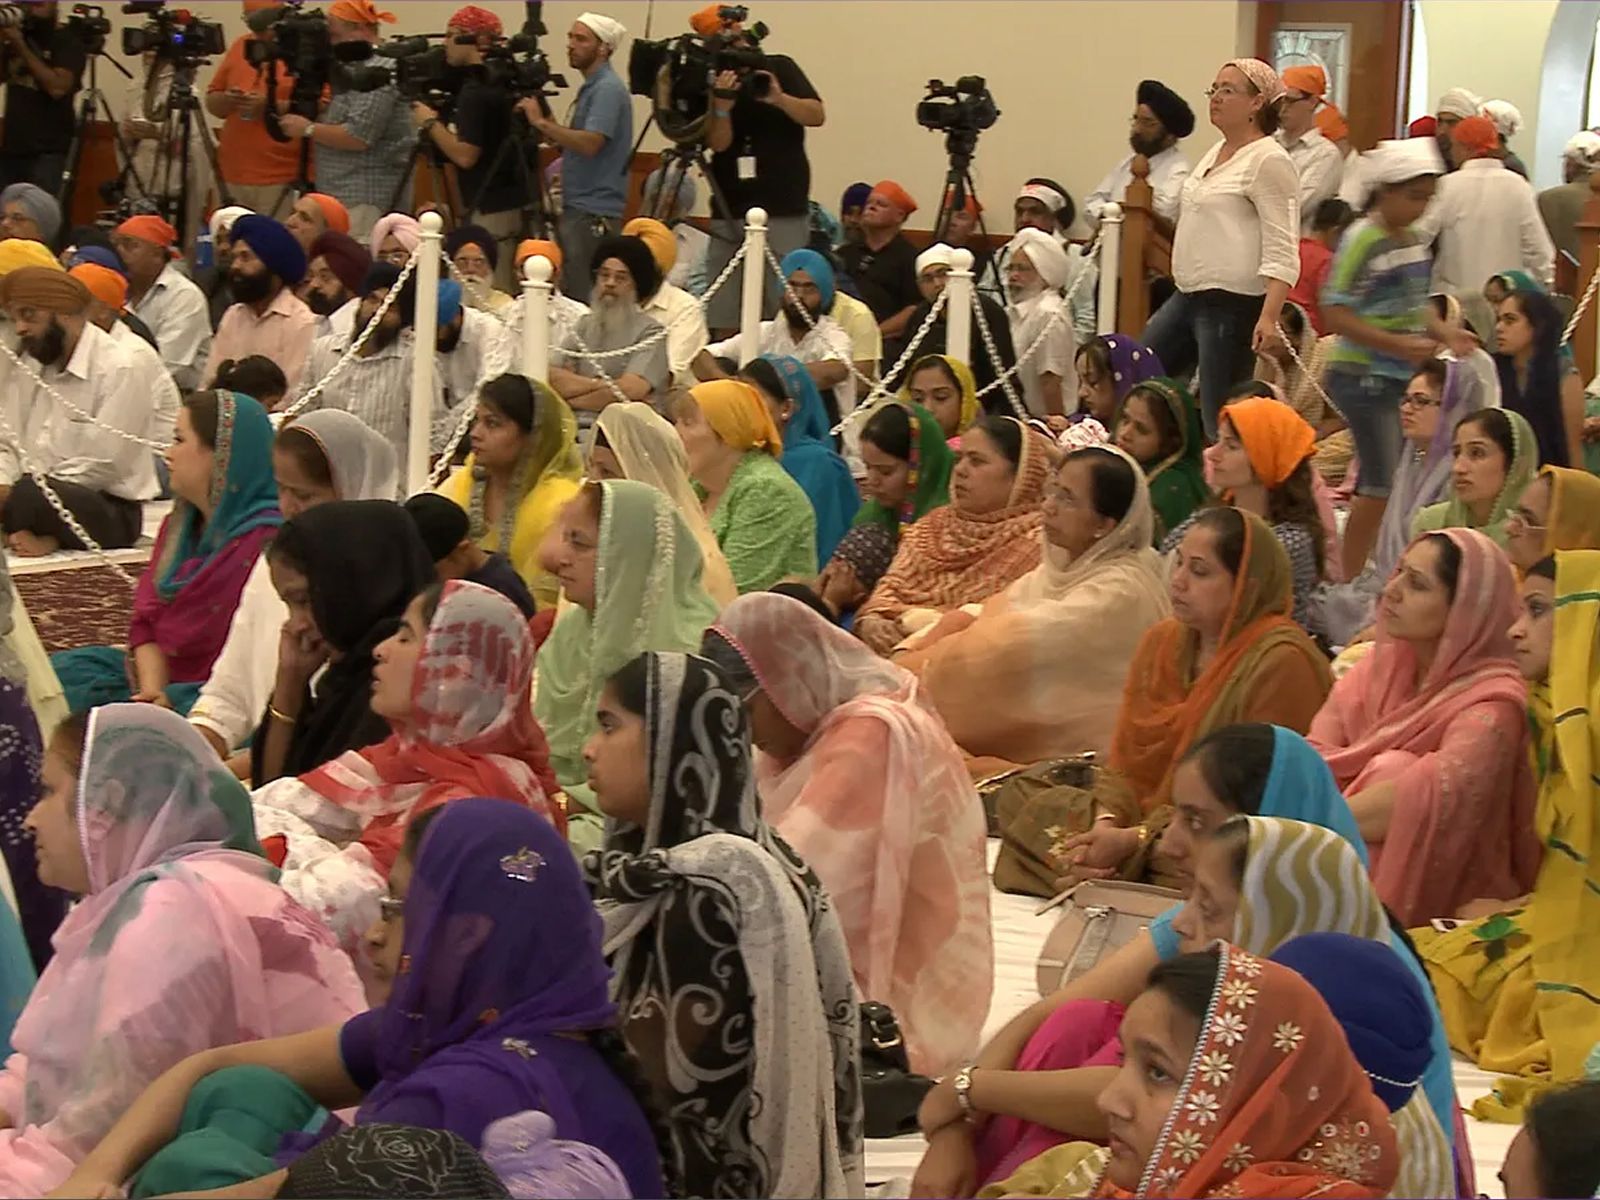  The Sikh tradition of forgiveness in Oak Creek Wisconsin